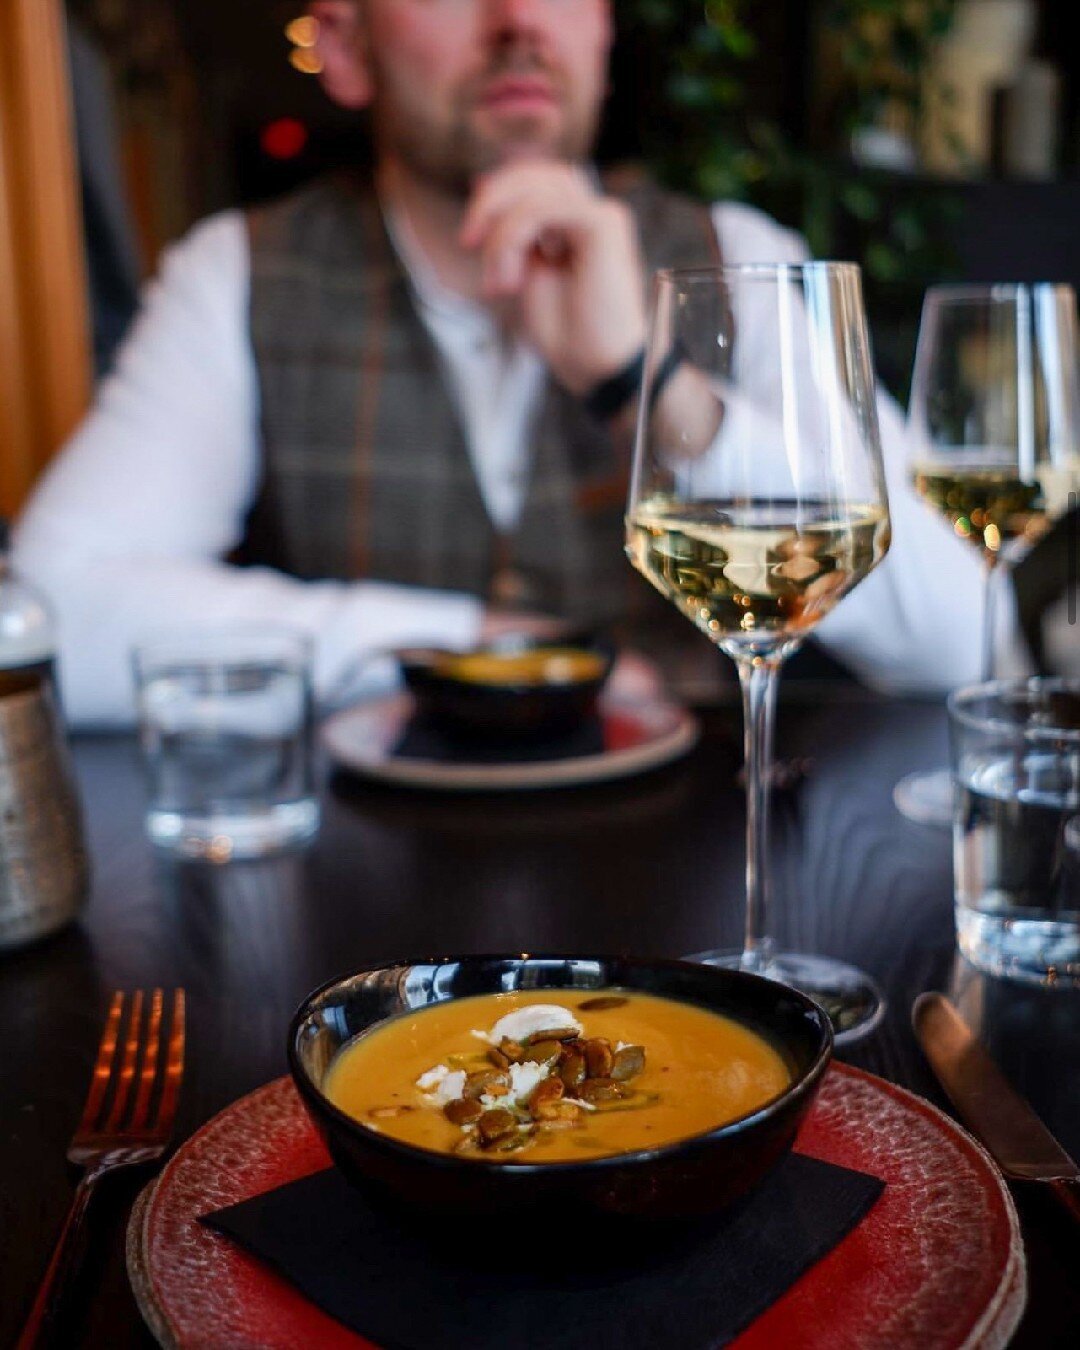 Cozy up with a bowl of our Butternut Squash Soup, made with the freshest local ingredients. The whipped ch&egrave;vre adds a tangy creaminess that perfectly balances the sweetness of the butternut squash, while the spiced pepitas and chive oil lend a